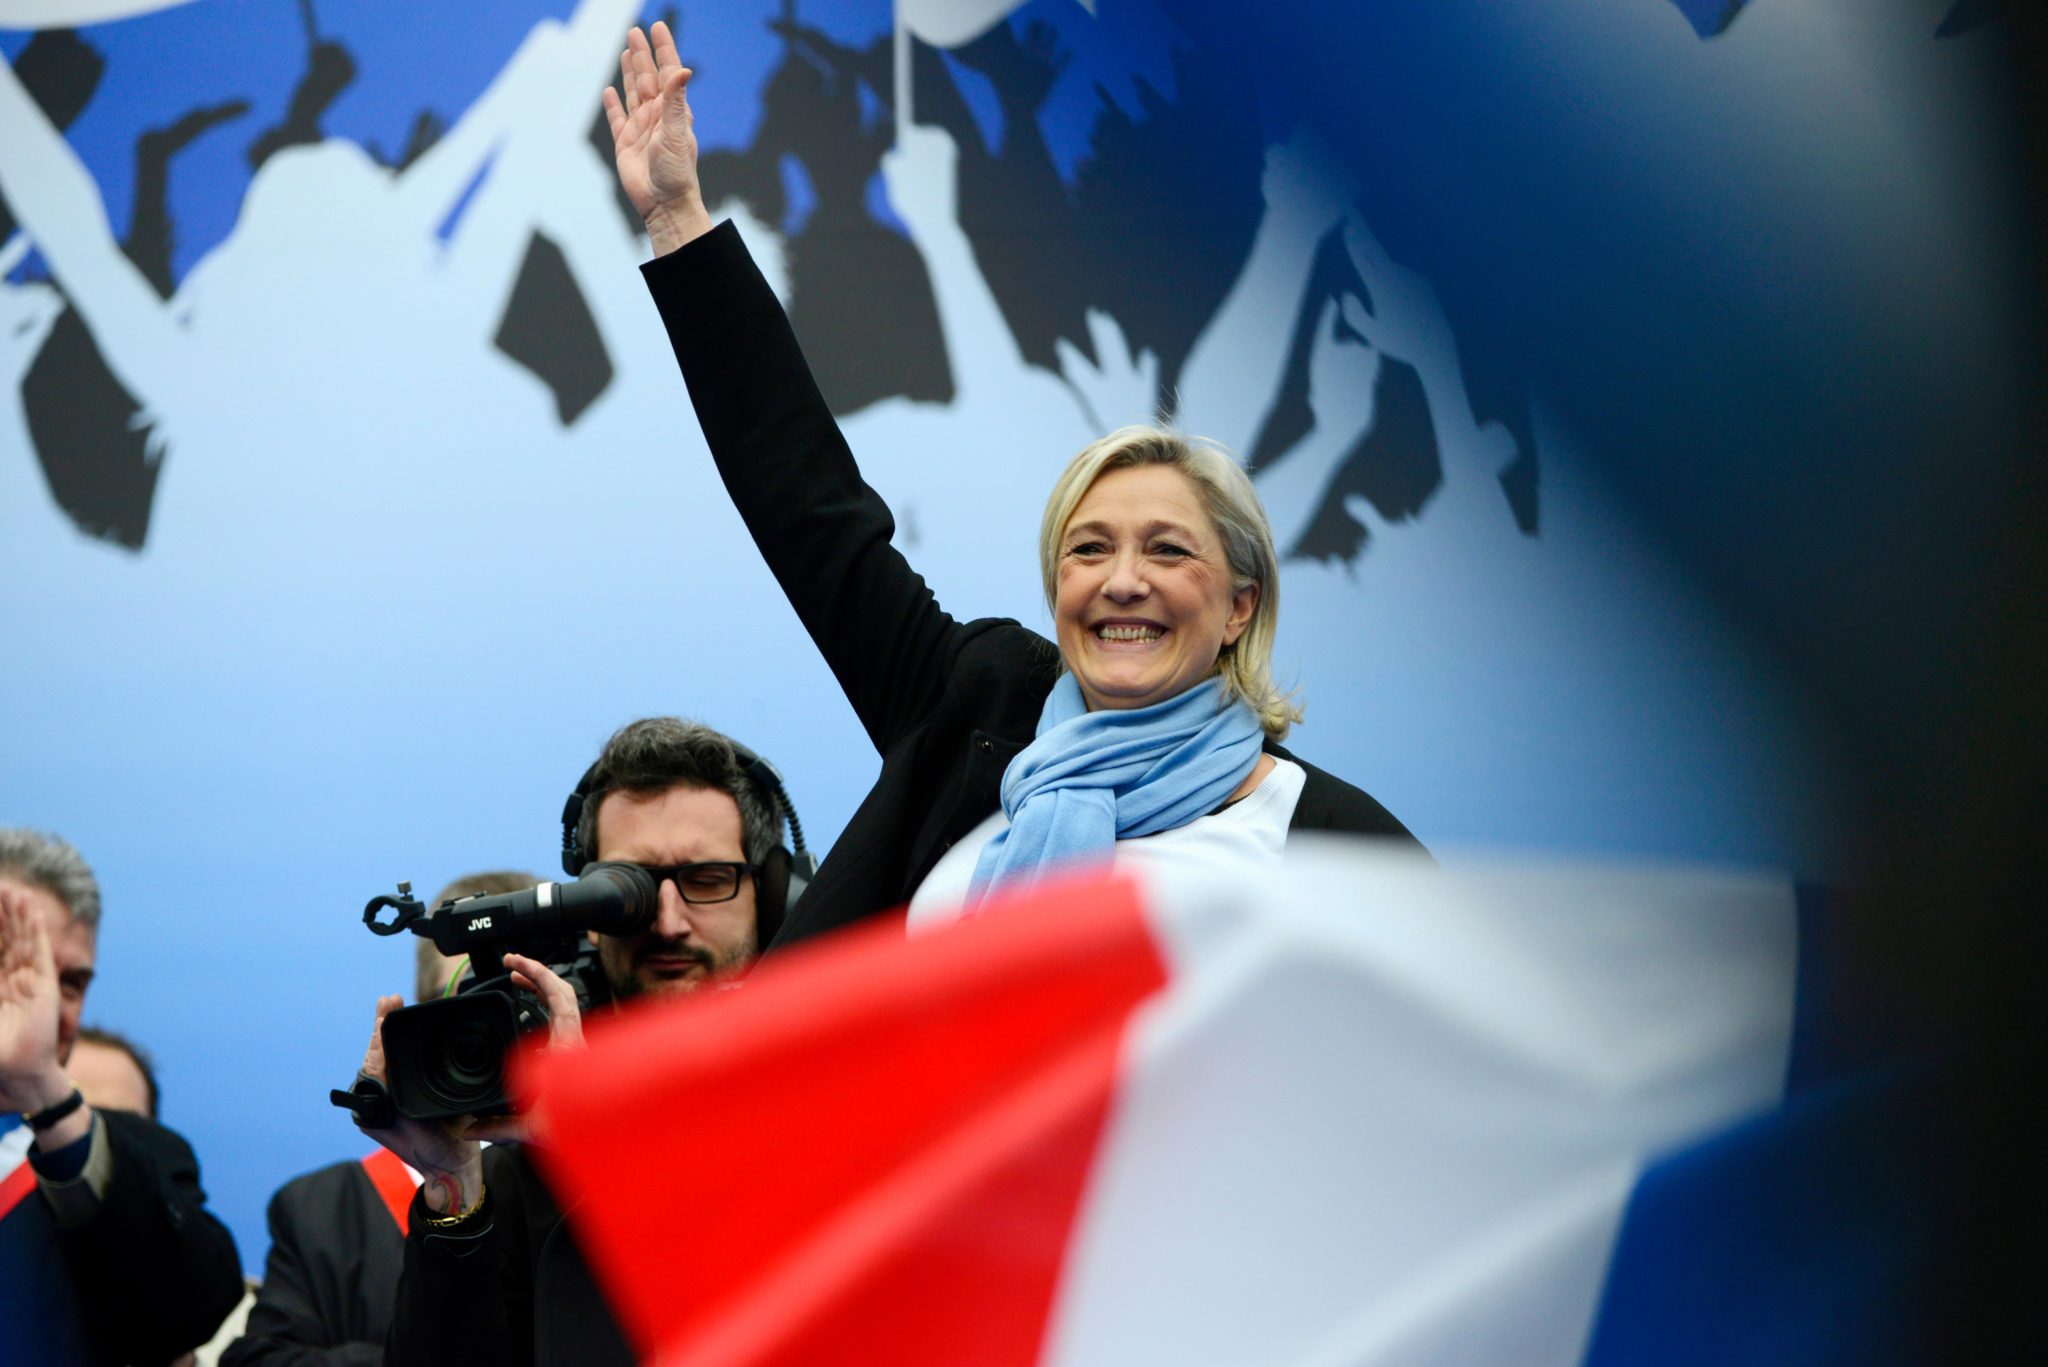 File photo of Marine Le Pen, France's Front National leader, in 2013.